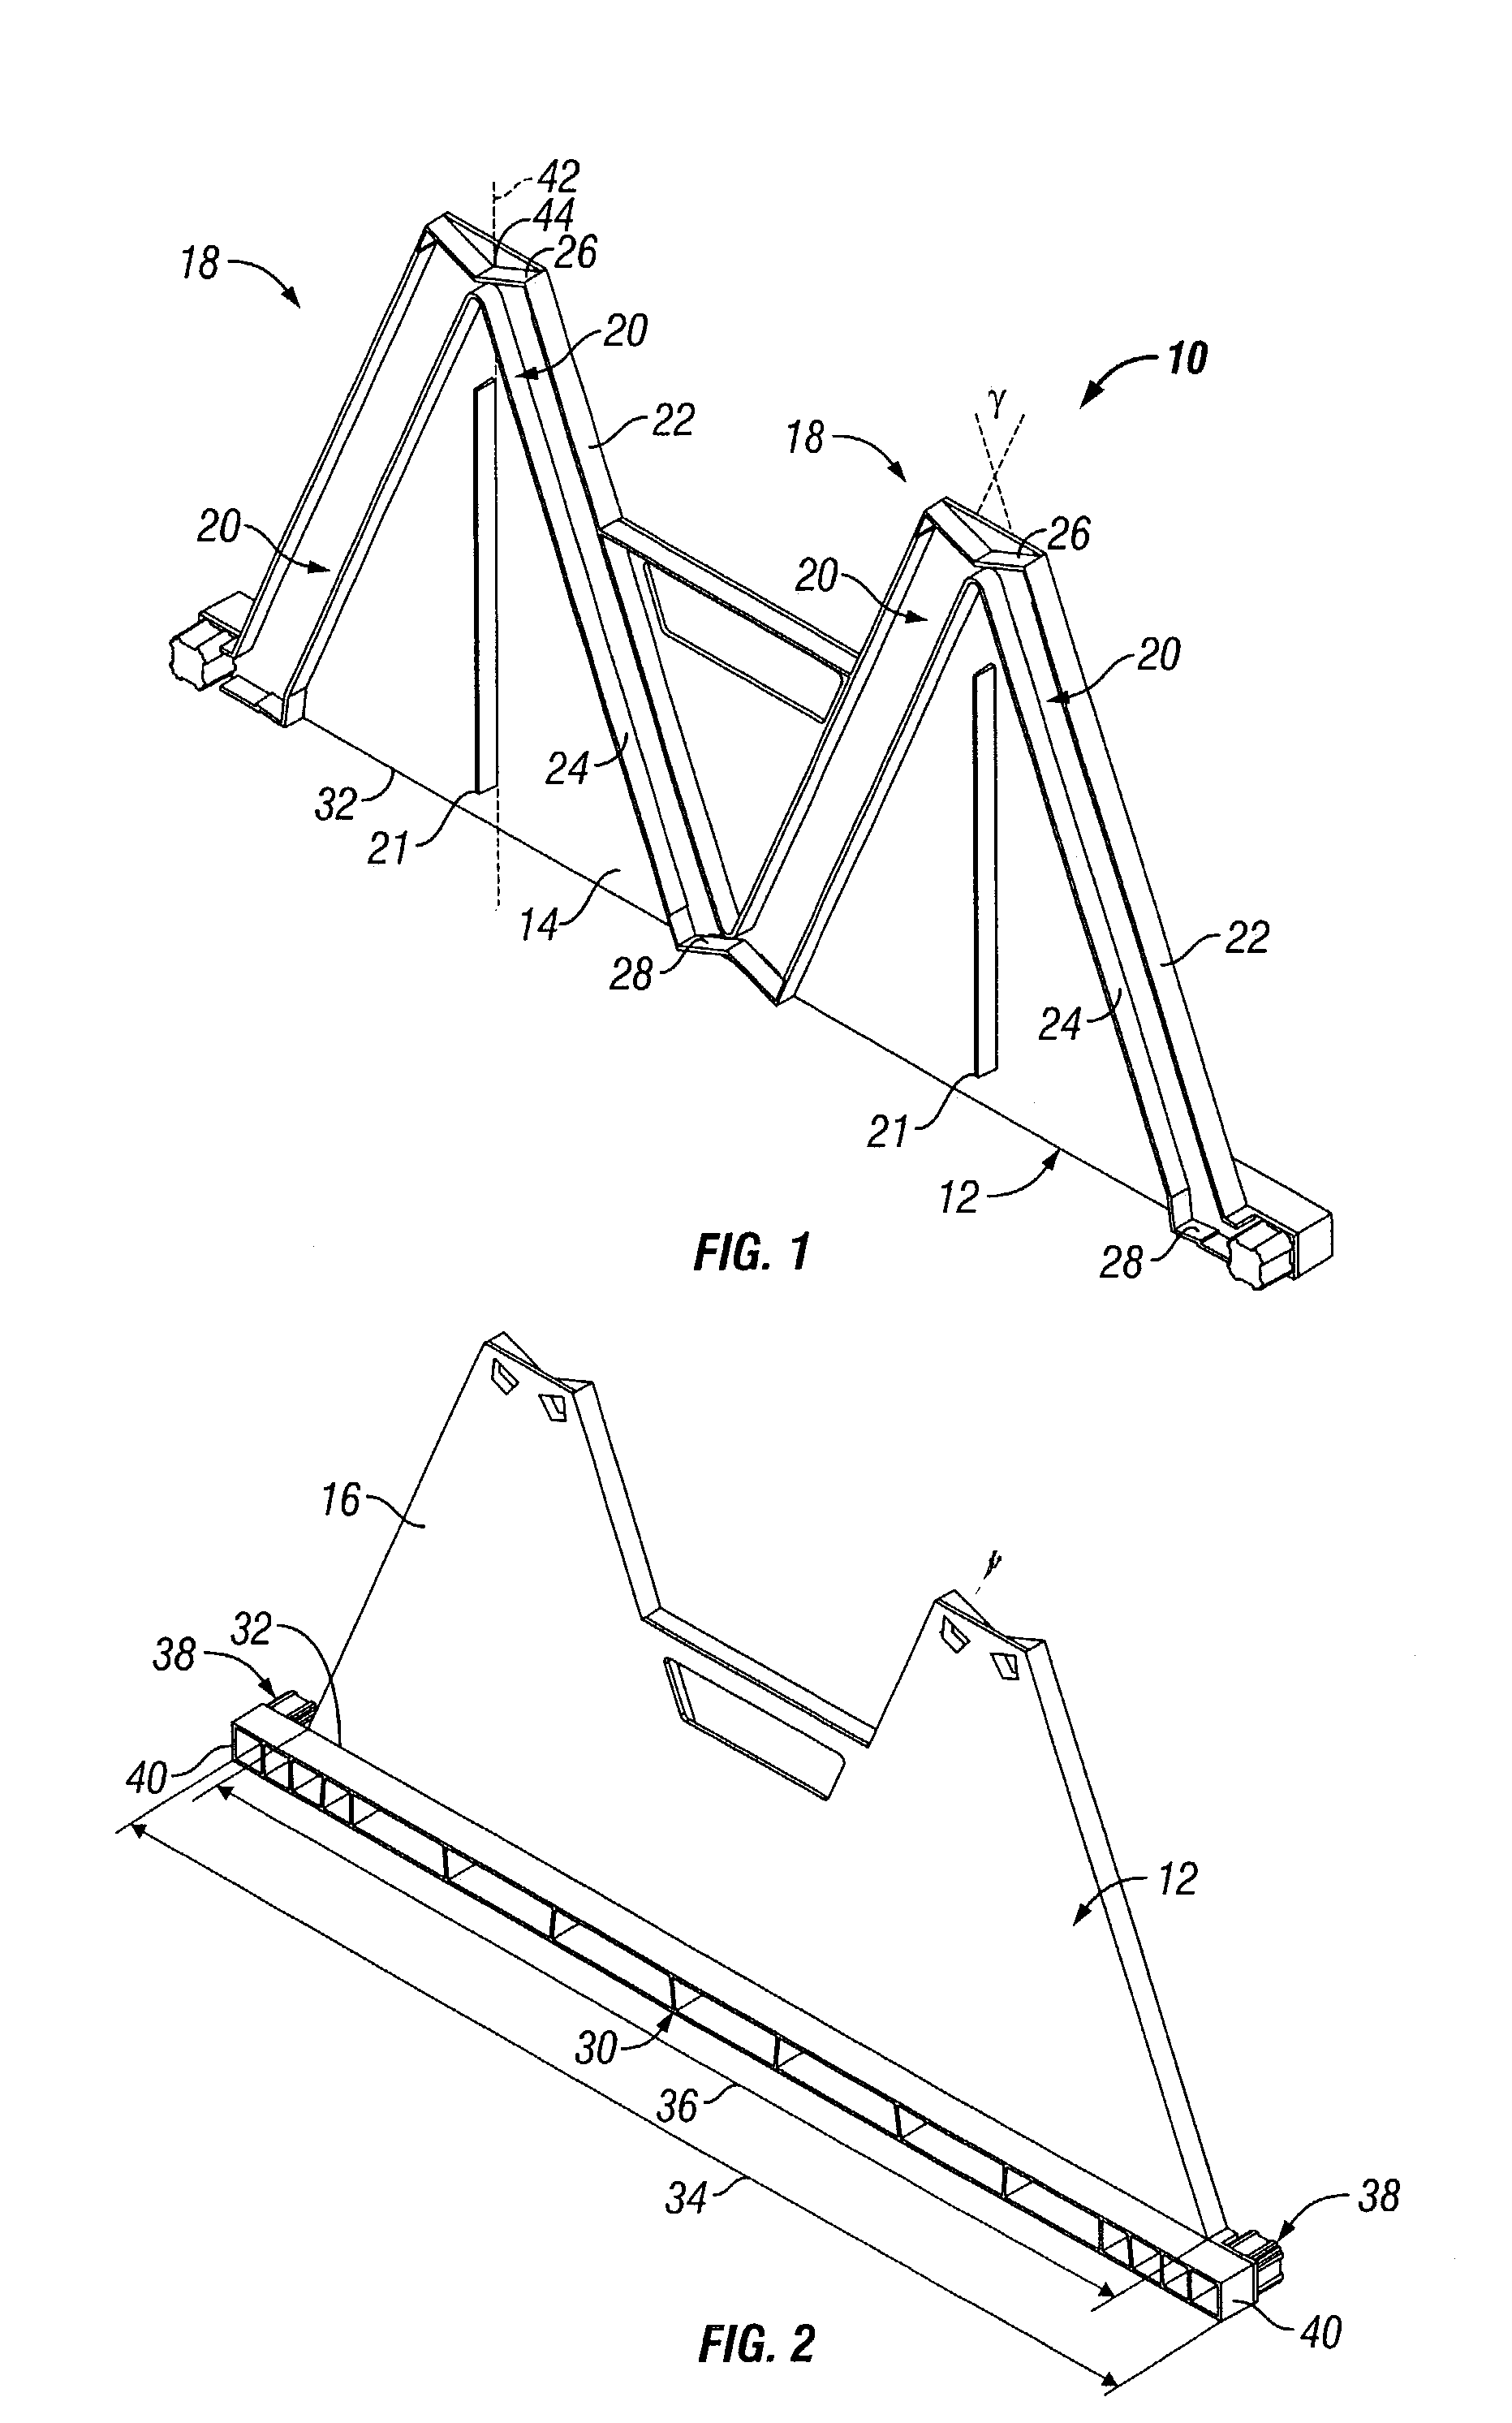 Filter frame and assembly